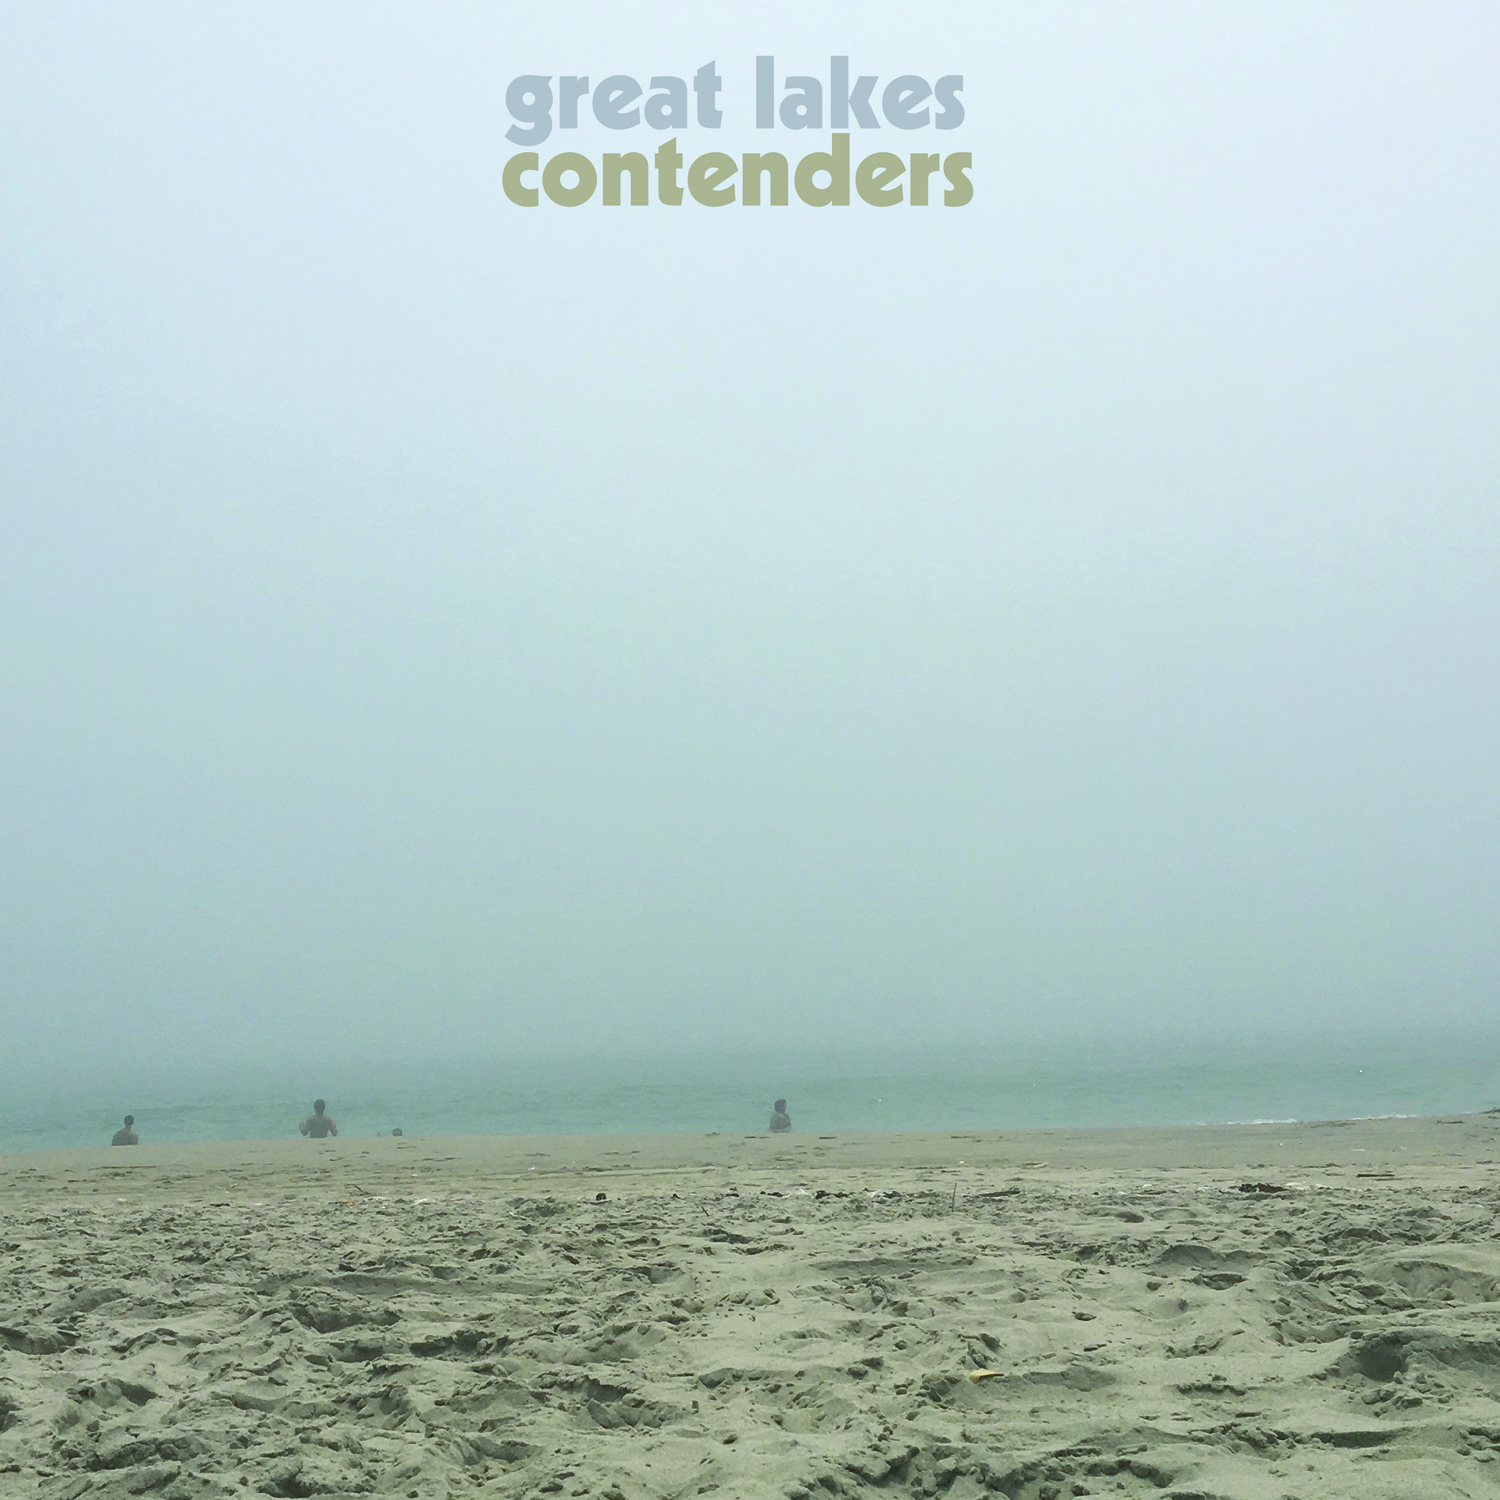 STEREO EMBERS ALBUM PREMIER – “Contenders” from Great Lakes, including a Track-by-Track Breakdown from Founder Ben Crum